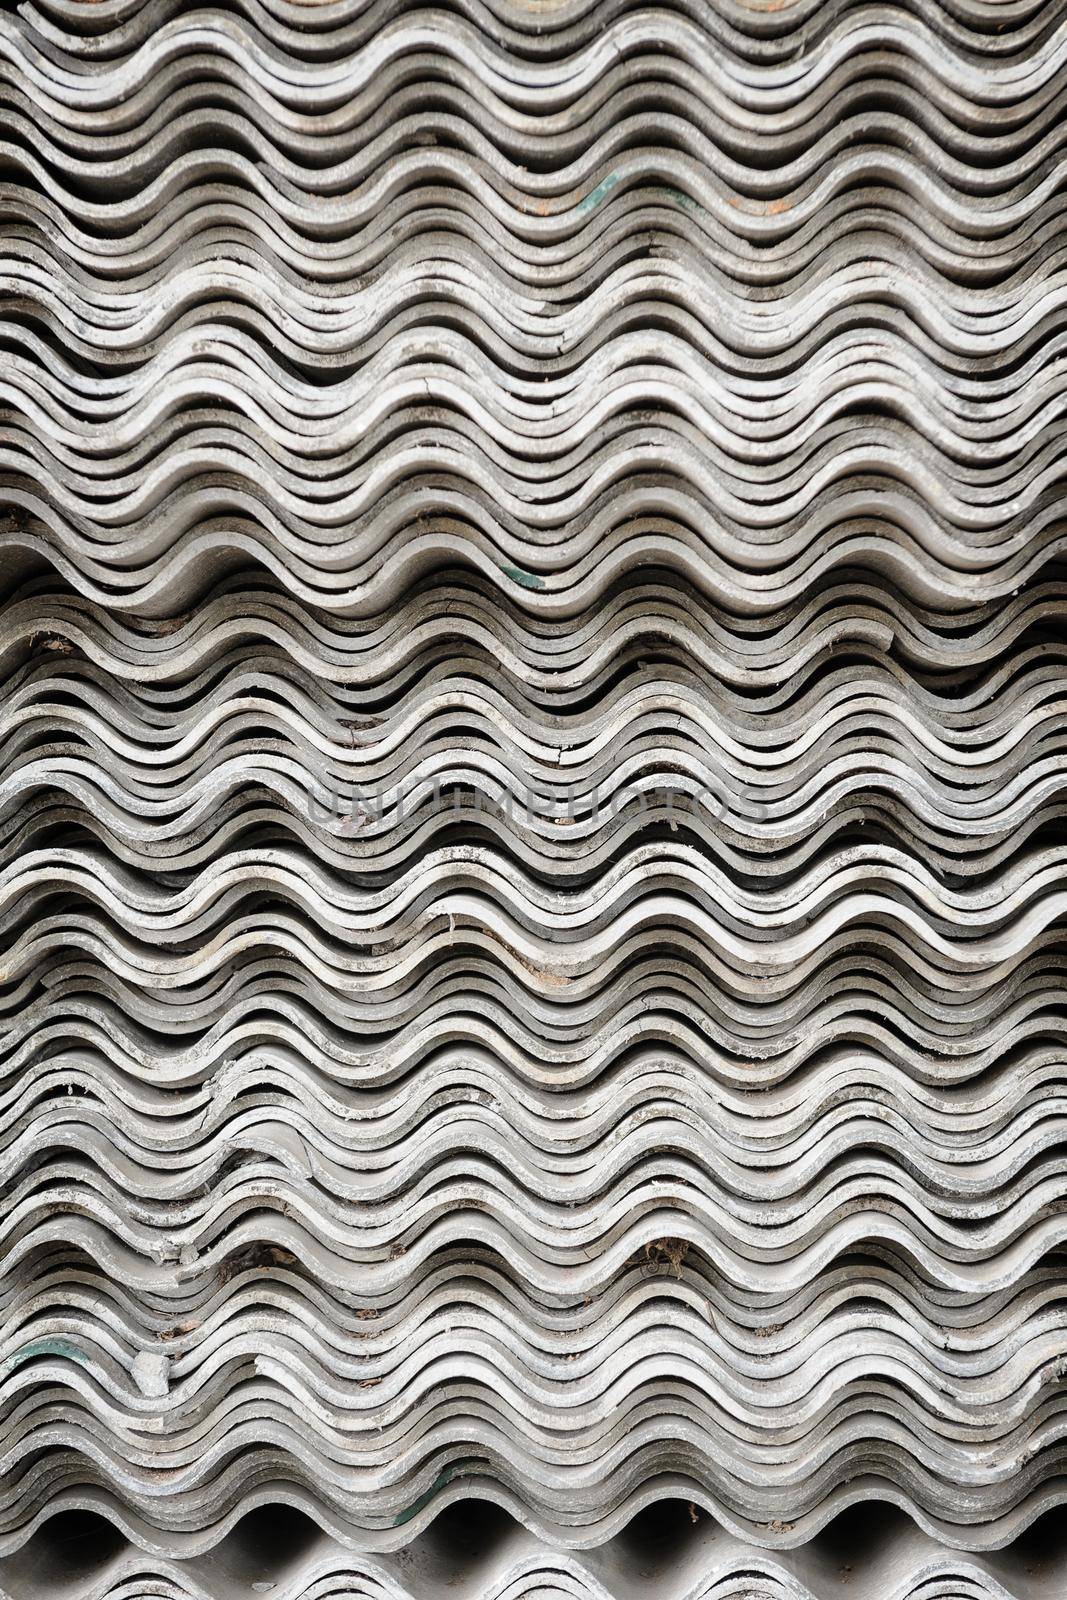 abstract roof tiles by norgal